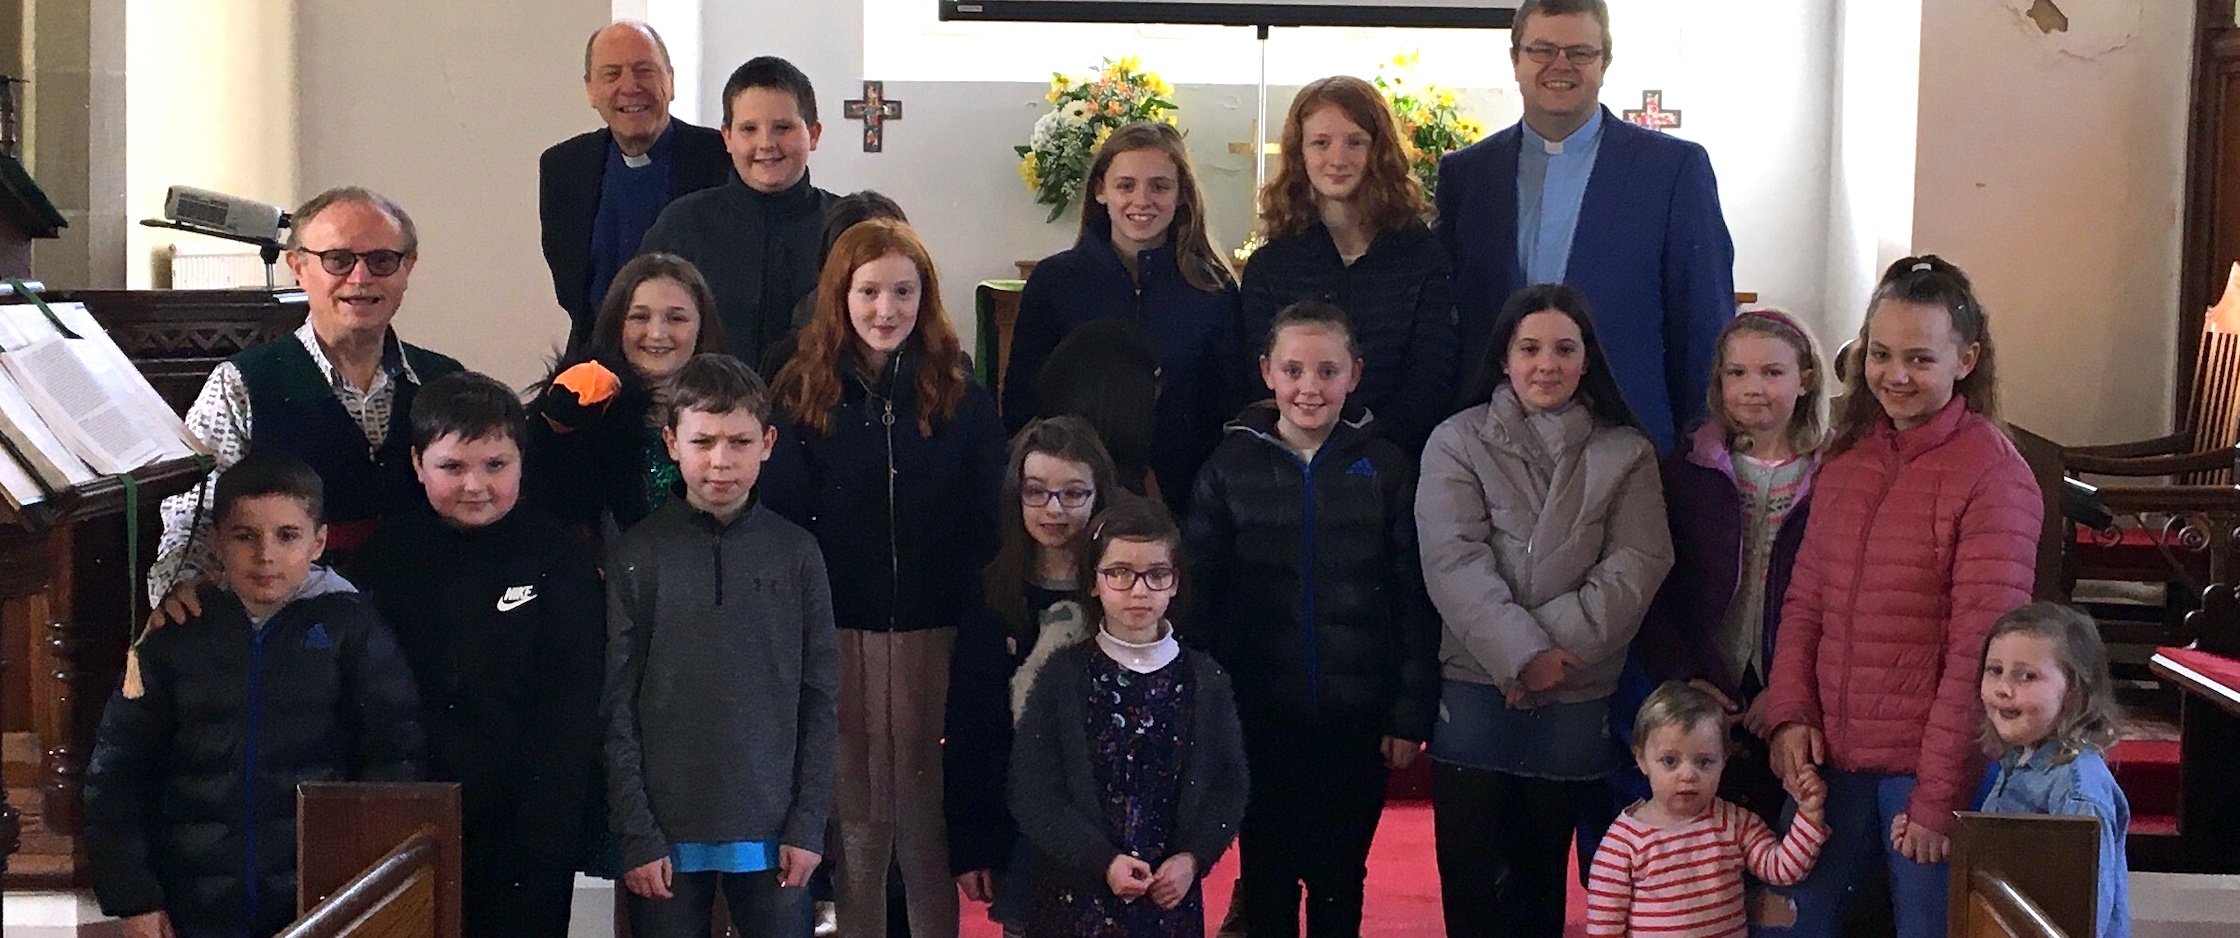 Pictured above: Nick Harding, along with Revd Captain Scott McDonald and Revd Adrian Dorrian (Team Vicars in LAMP) and some of the children and young people at the Pop Up All Age Service.